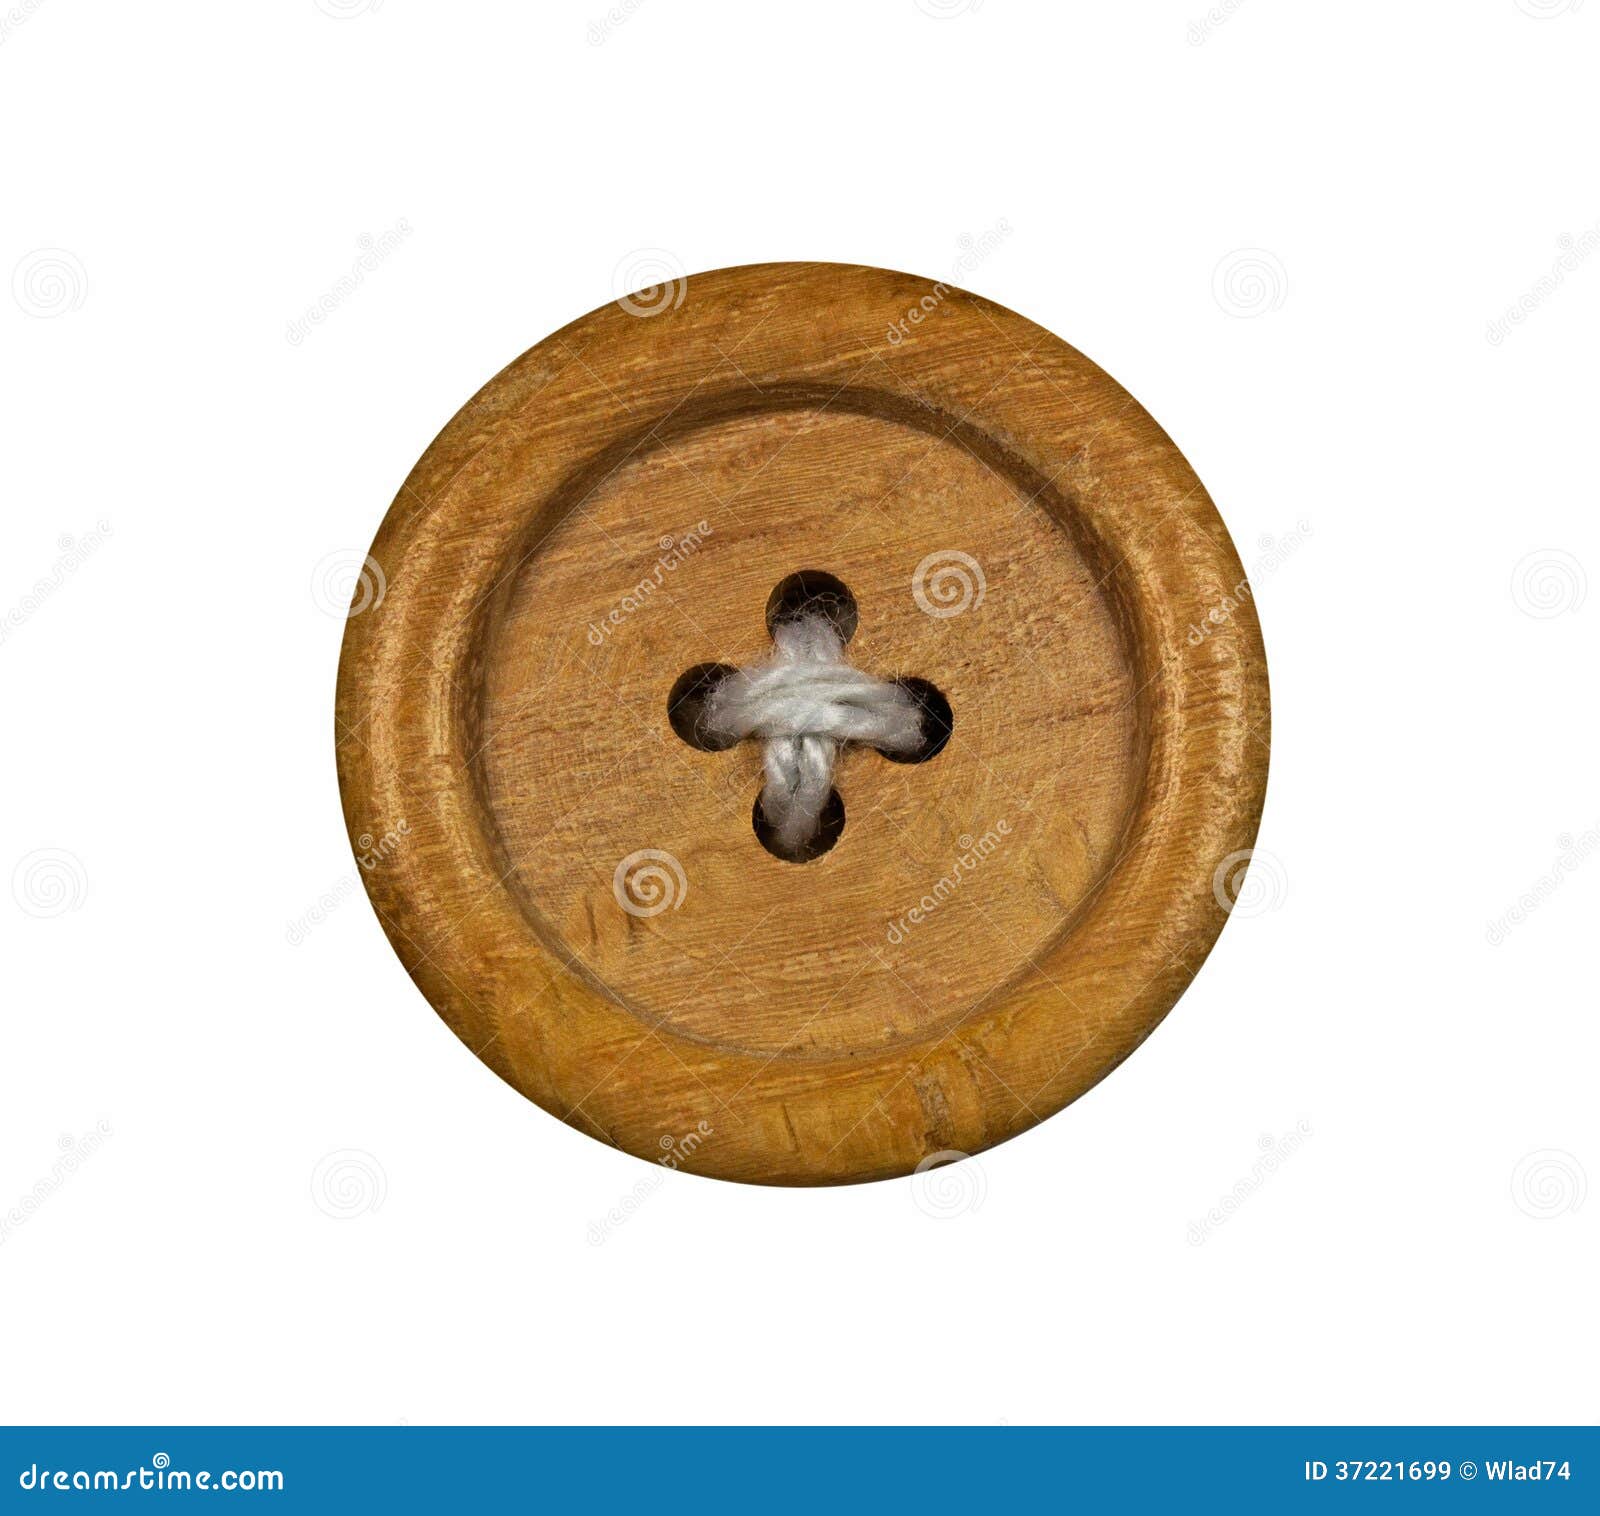 Wooden Buttons Stock Photo, Picture and Royalty Free Image. Image 46265508.